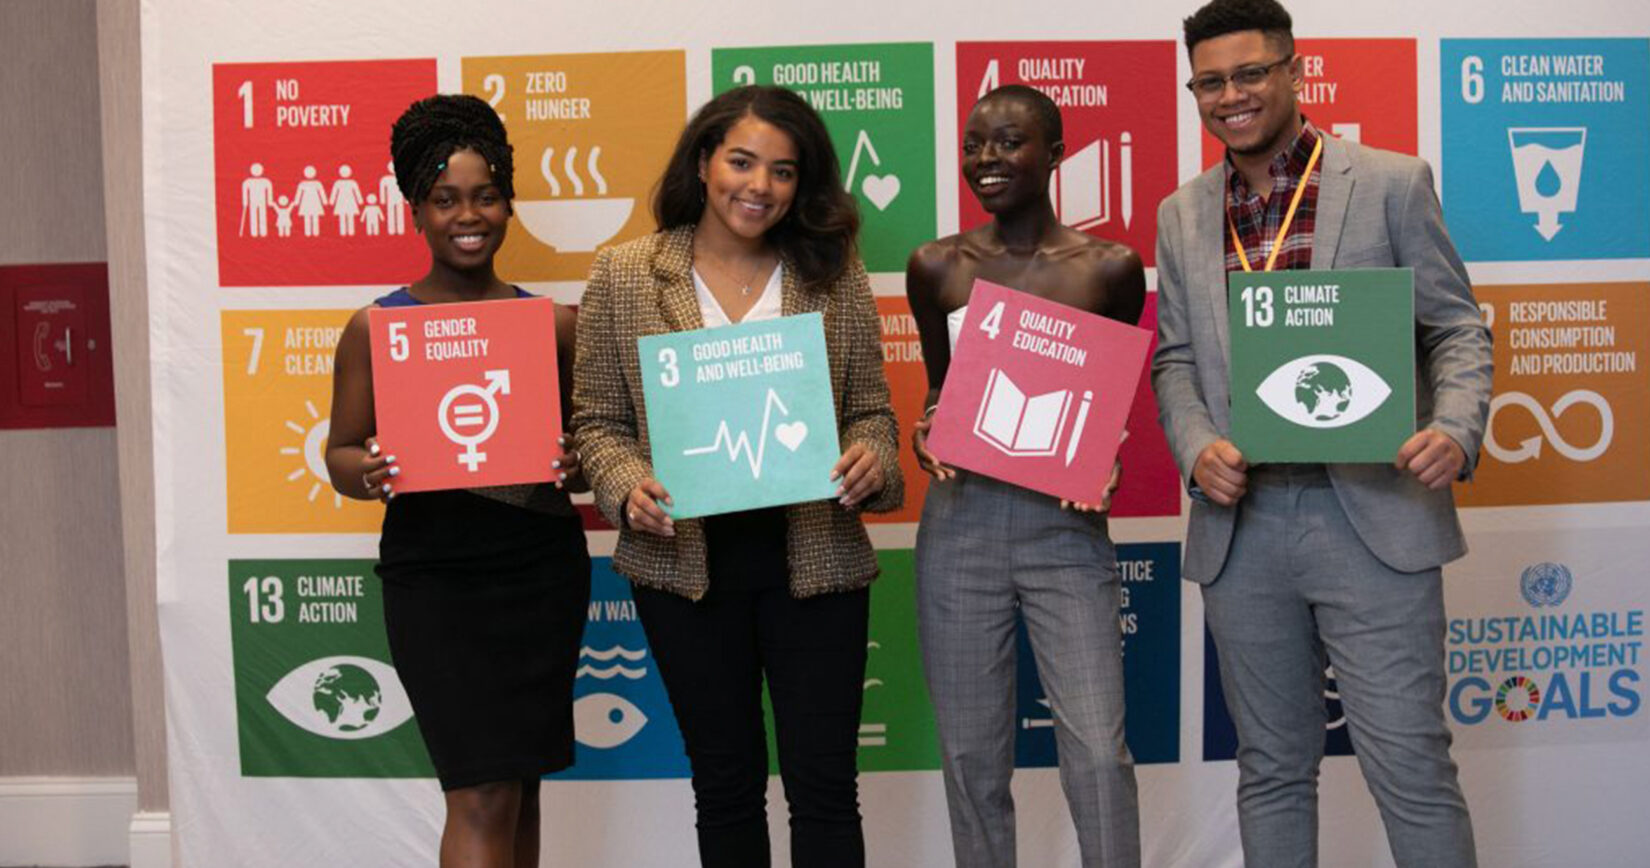 SouKenya Diaouf and others pose with signs promoting the Sustainable Development Goals